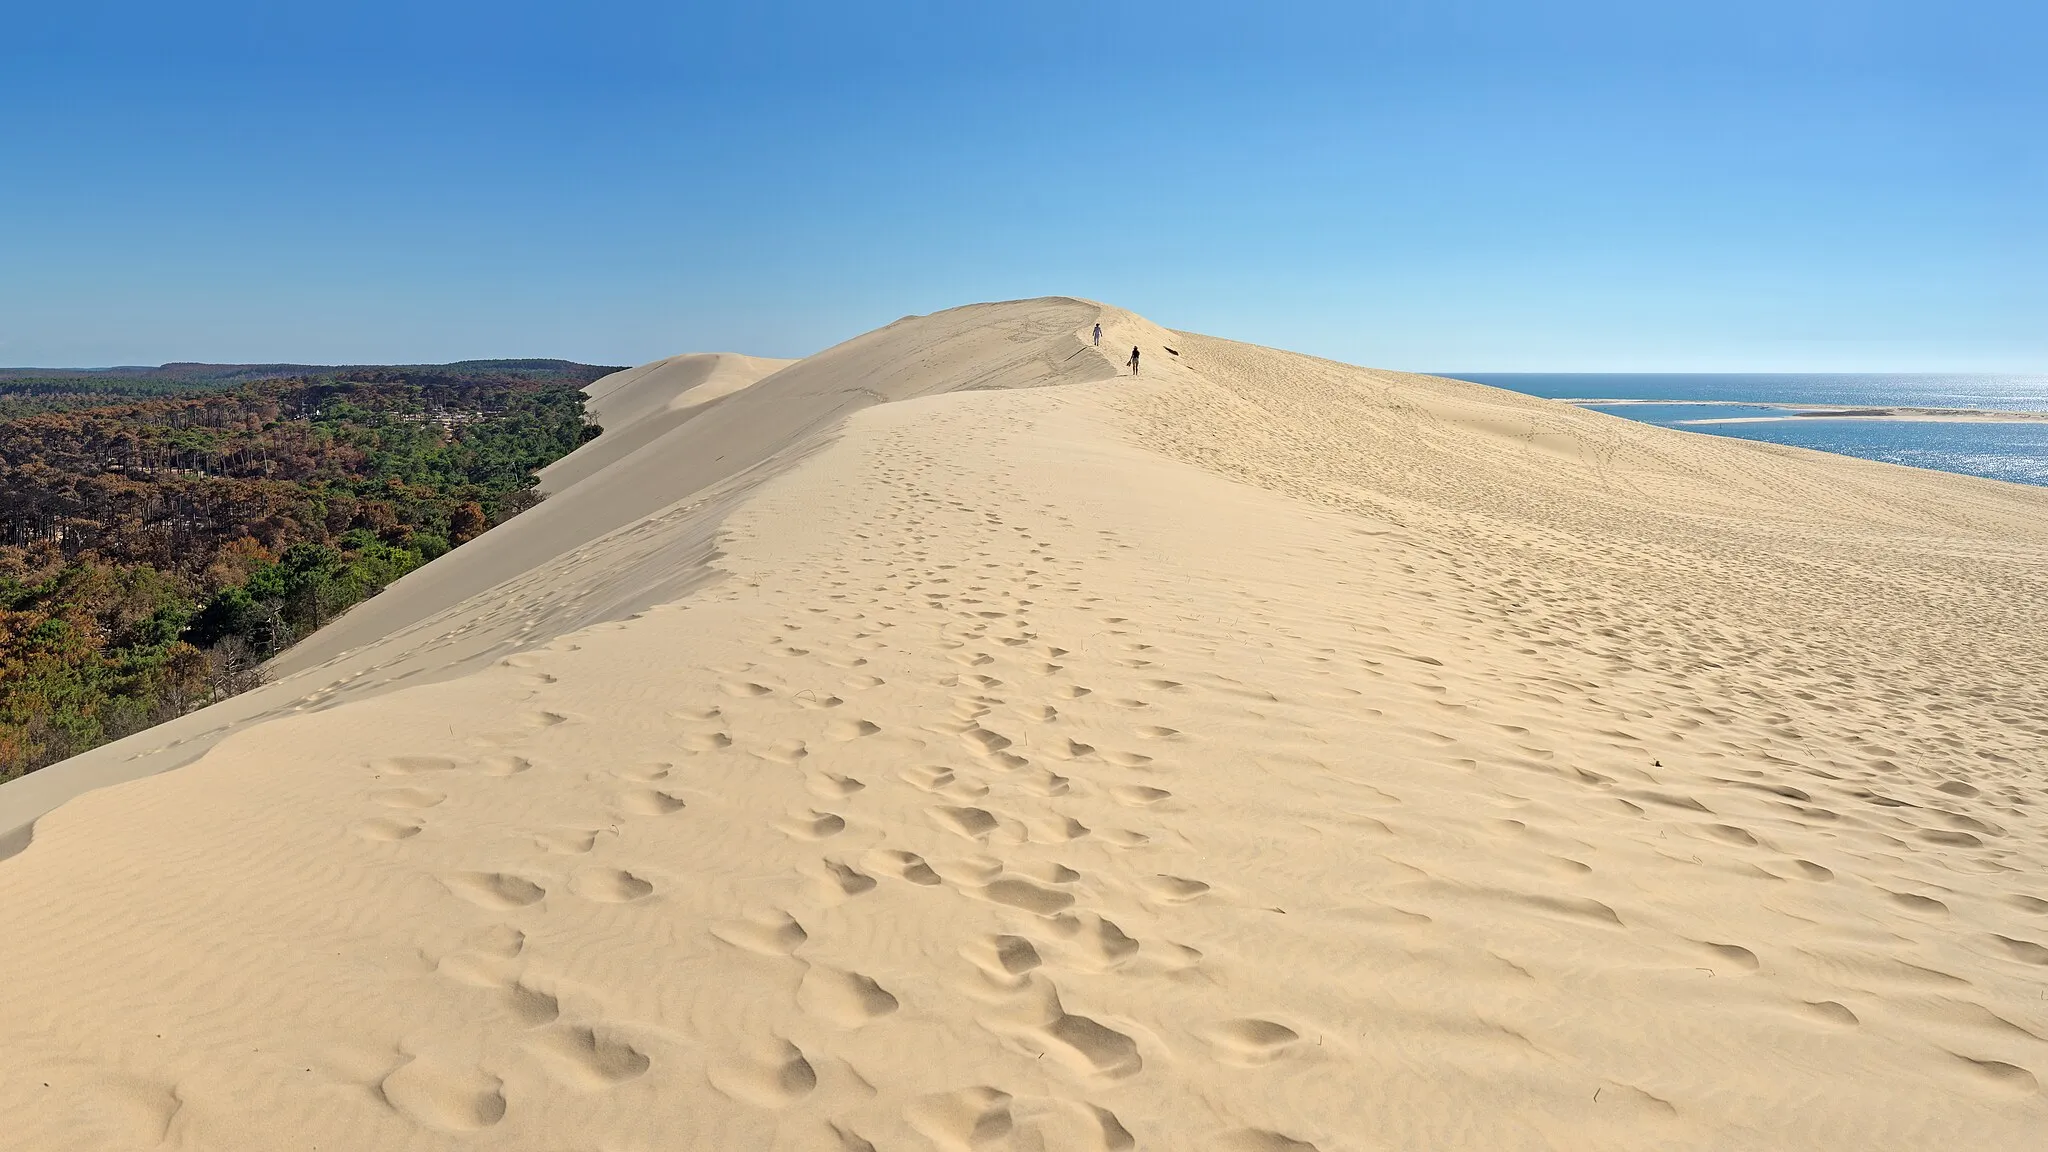 Photo showing: On the Dune of Pilat, Arcachon Bay area, France